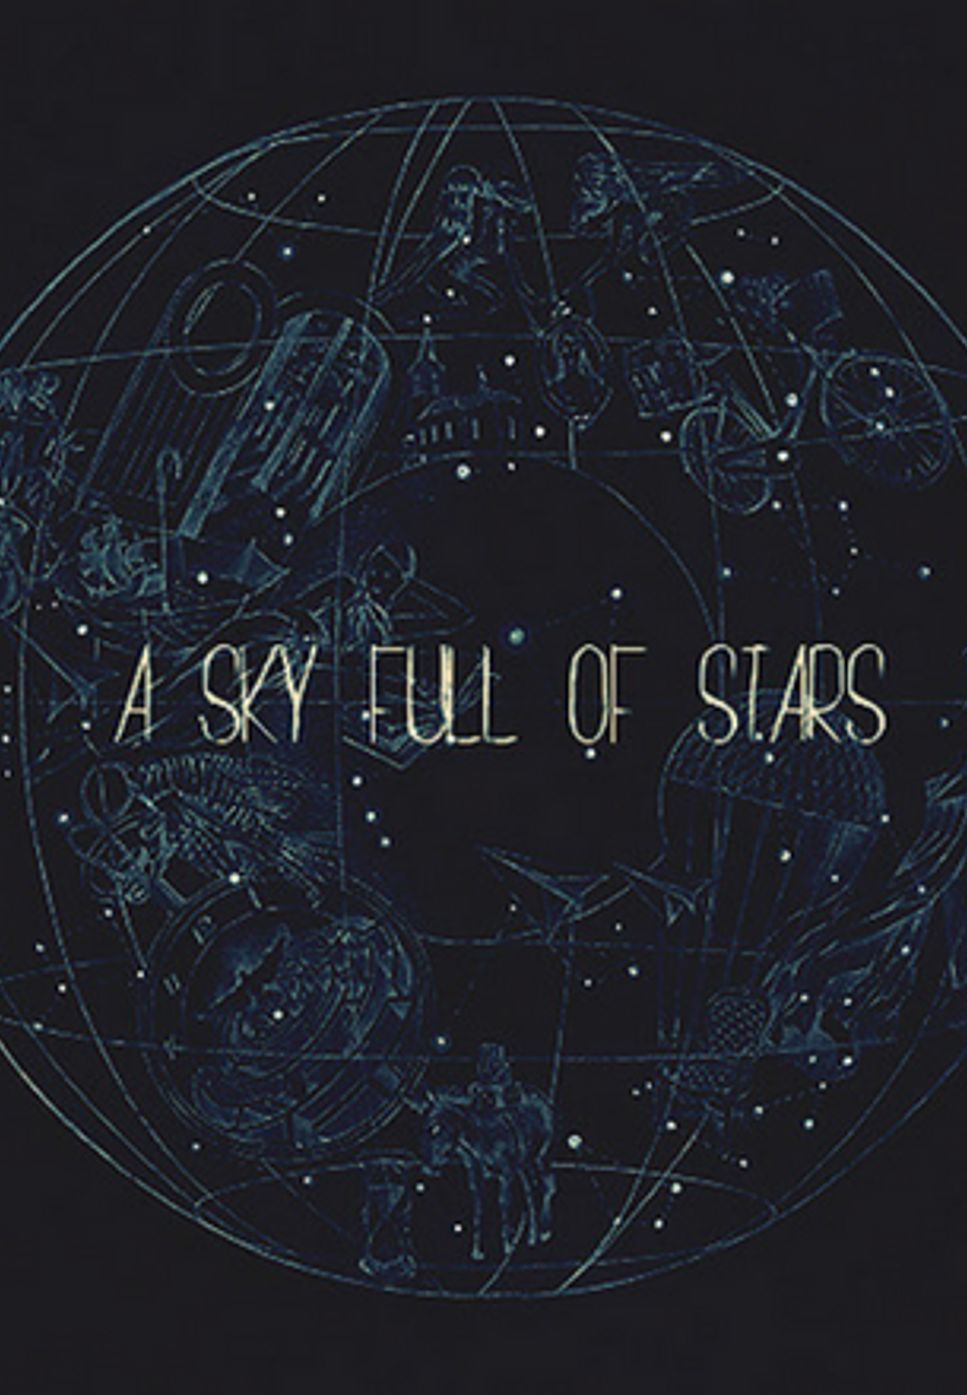 Coldplay - A Sky Full Of Stars by Chris Martin